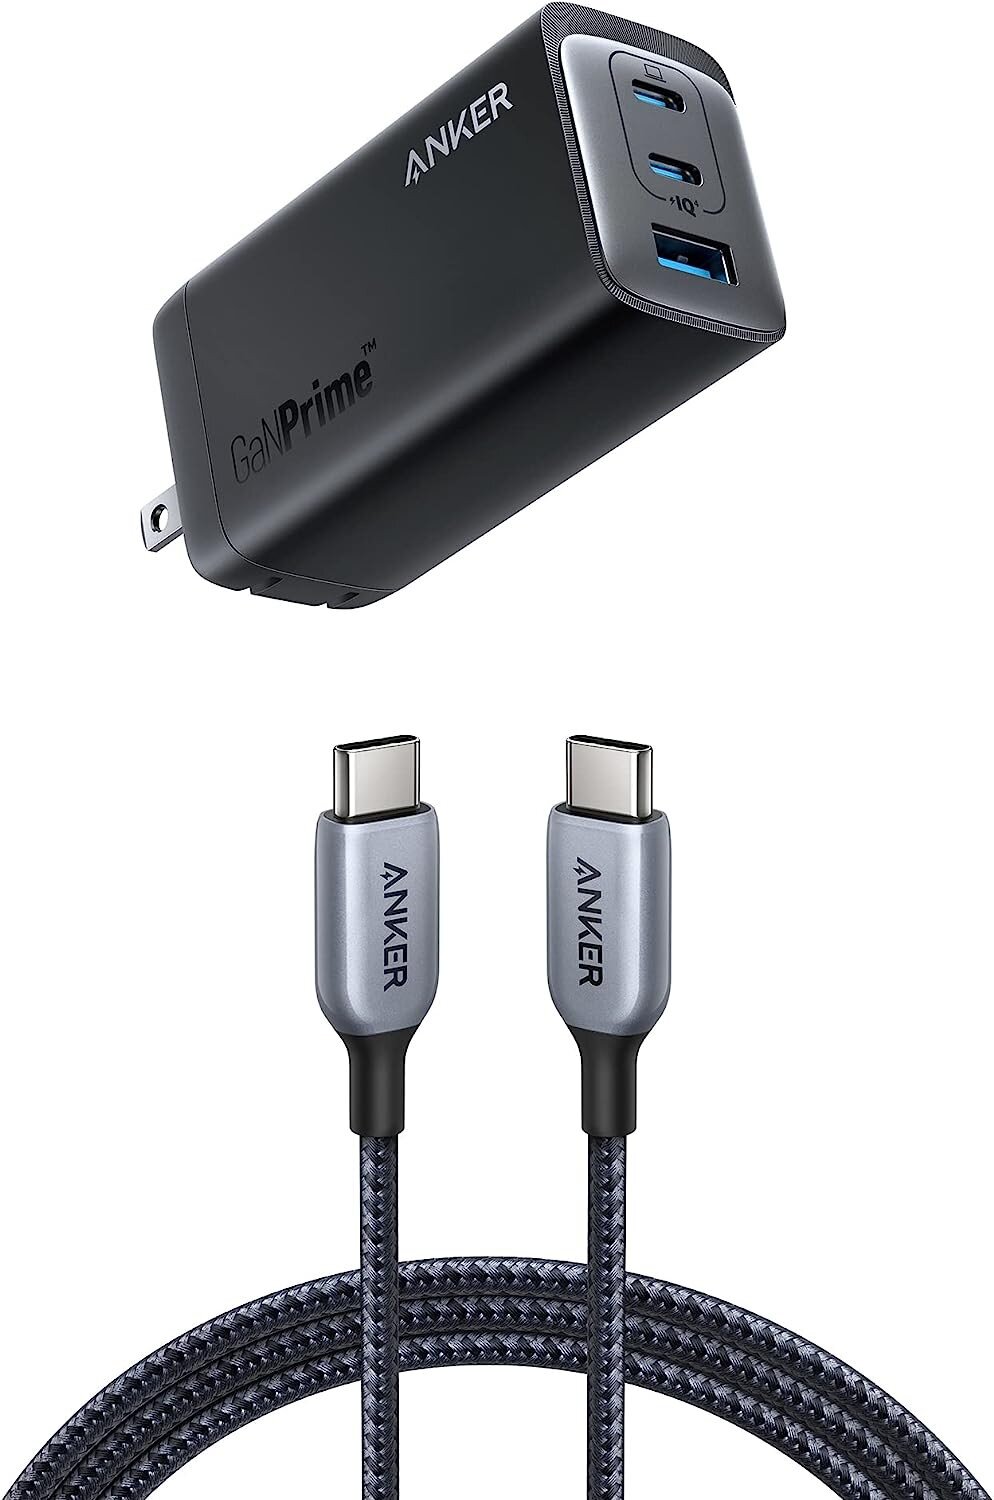 Anker 737 Charger (GaNPrime 120W) with USB-C to USB-C Cable